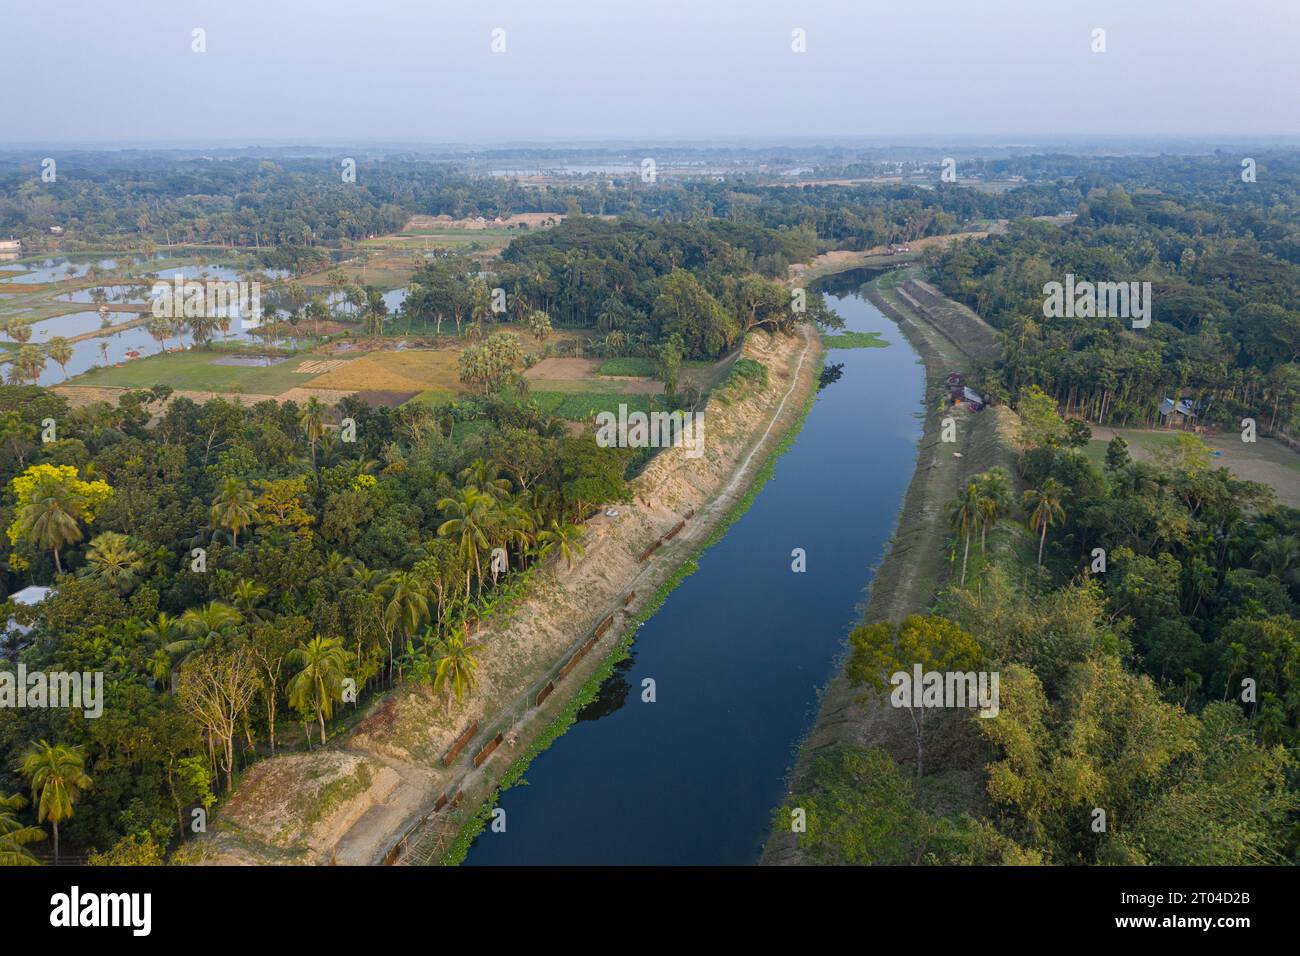 A dried-up canal at Keshabpur in Jashore returns to life after re-excavation works, aerial view of rural Bangladesh. Stock Photo